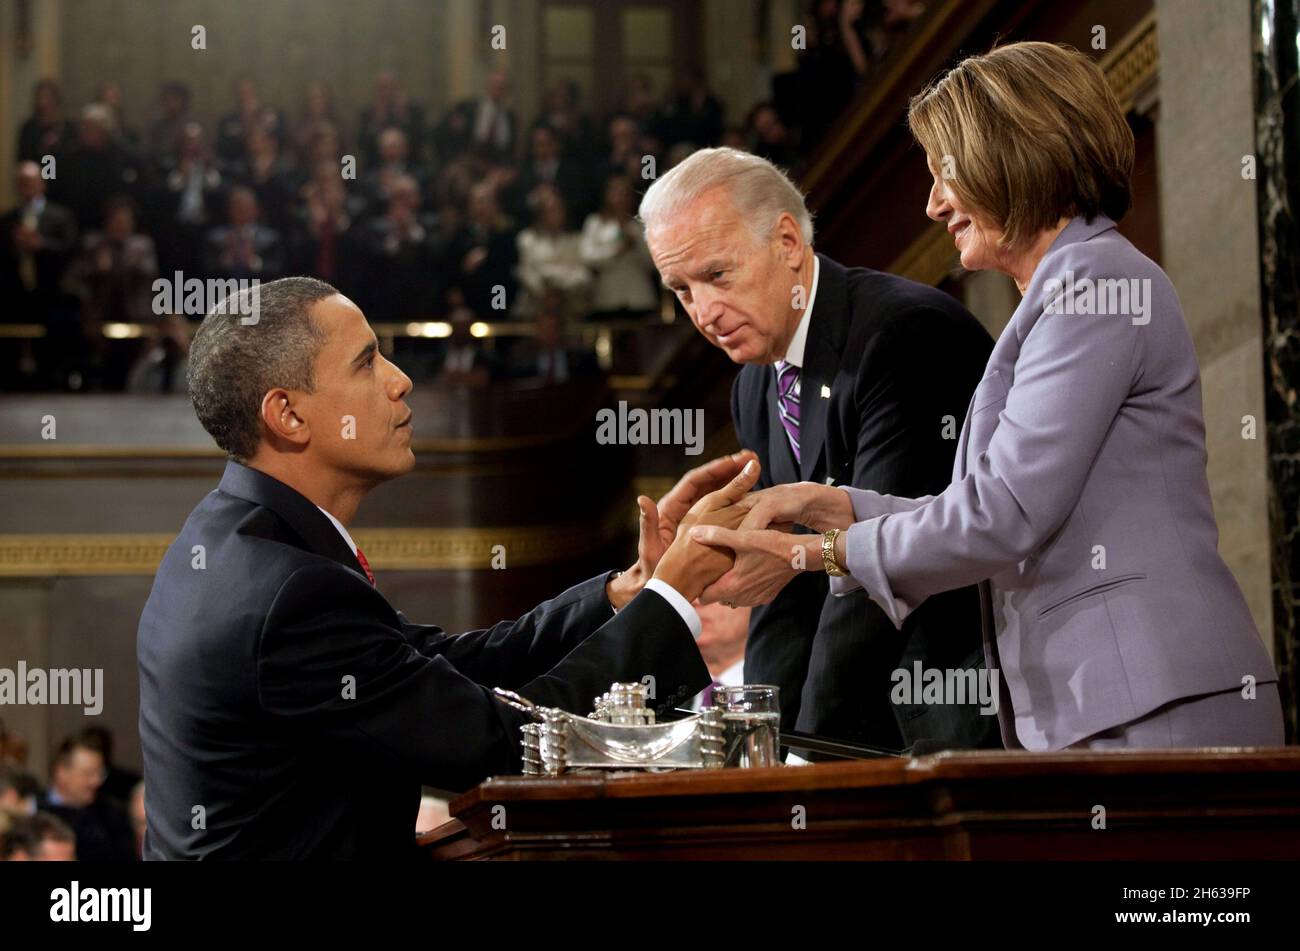 President Barack Obama shakes hands with Vice President Joe Biden and Speaker of the House Nancy Pelosi at the conclusion of his State of the Union address, Jan. 27, 2010 Stock Photo